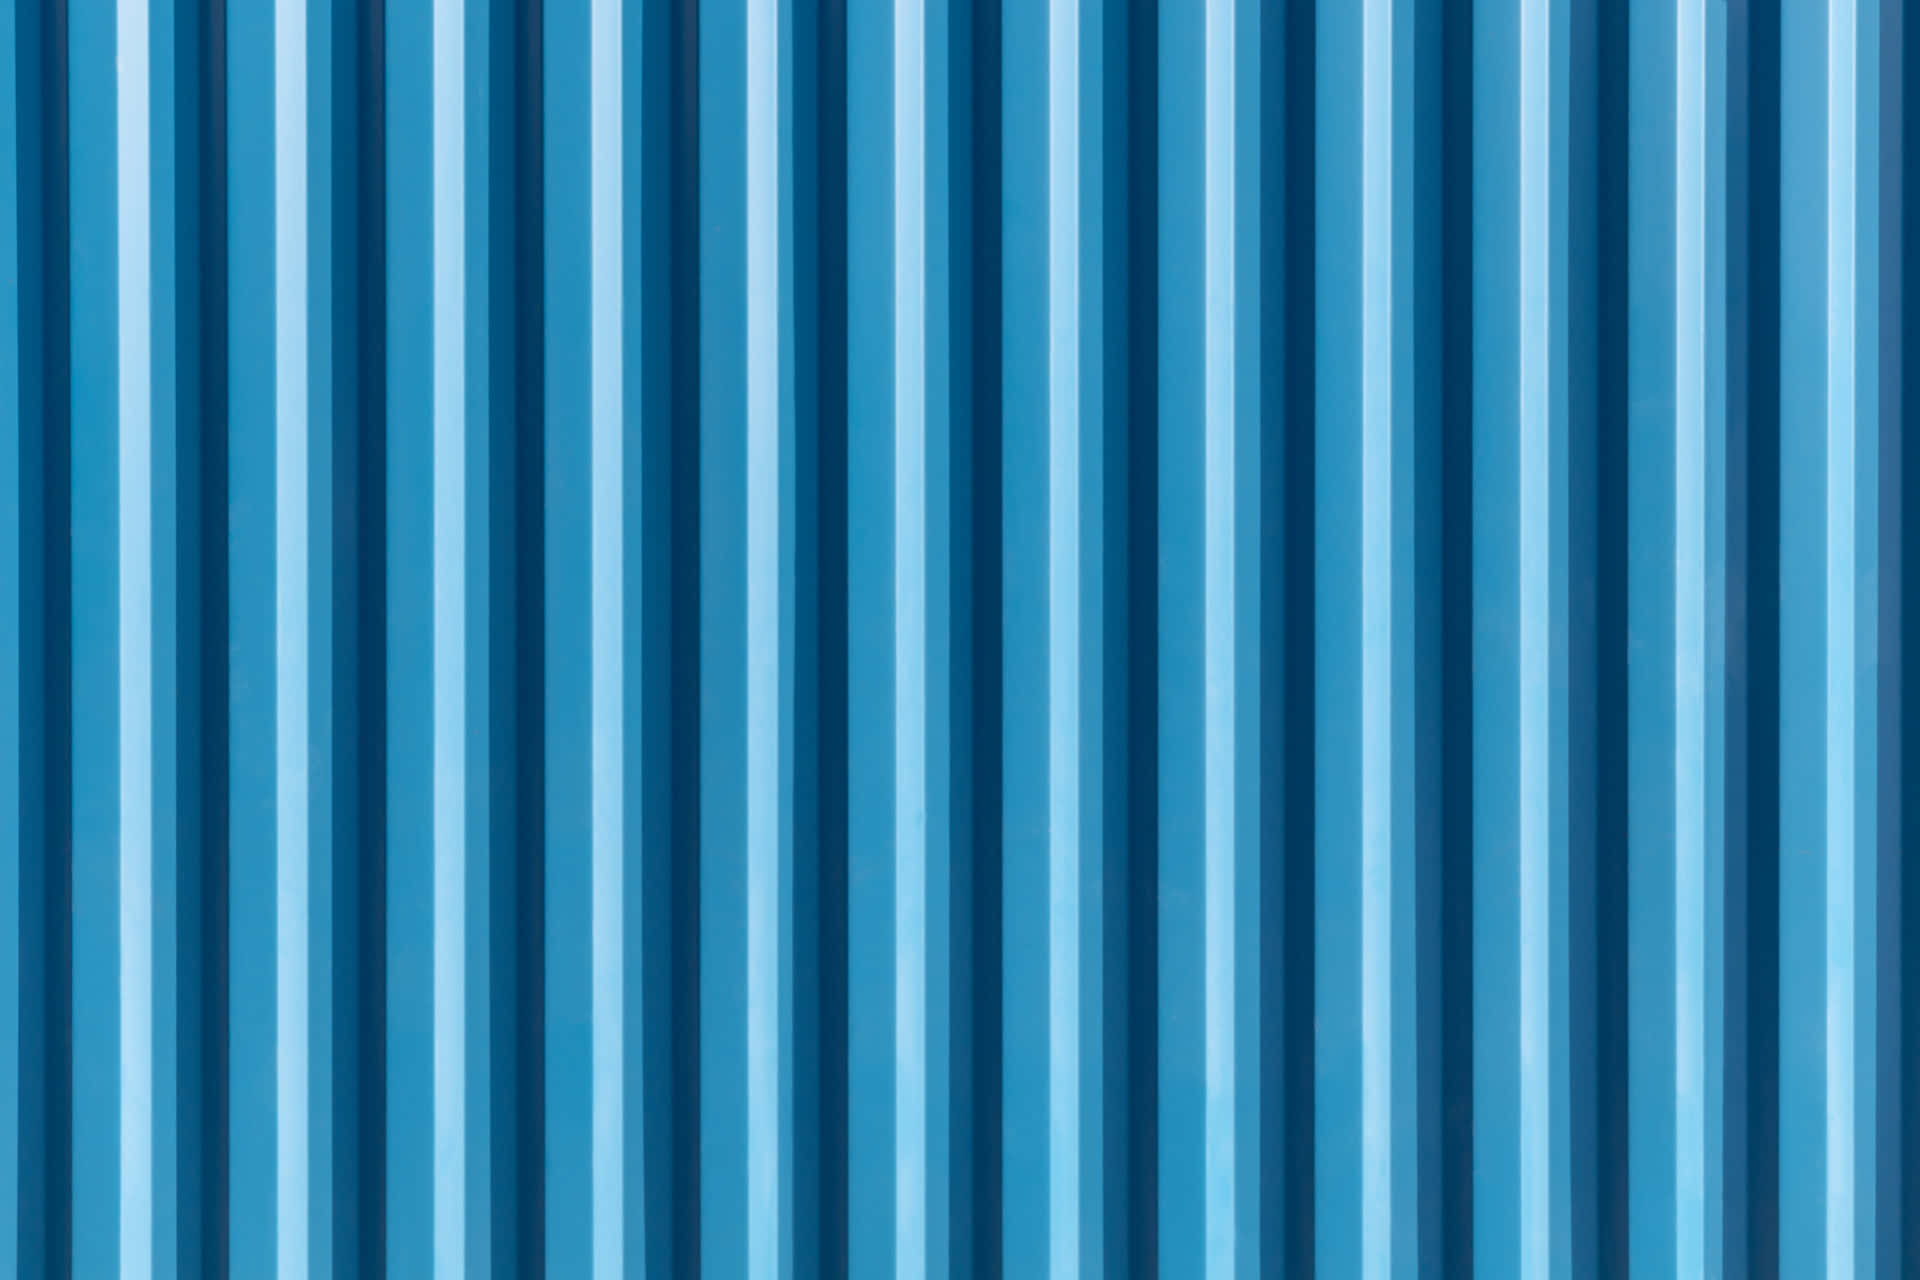 A Blue Corrugated Metal Wall With Vertical Lines